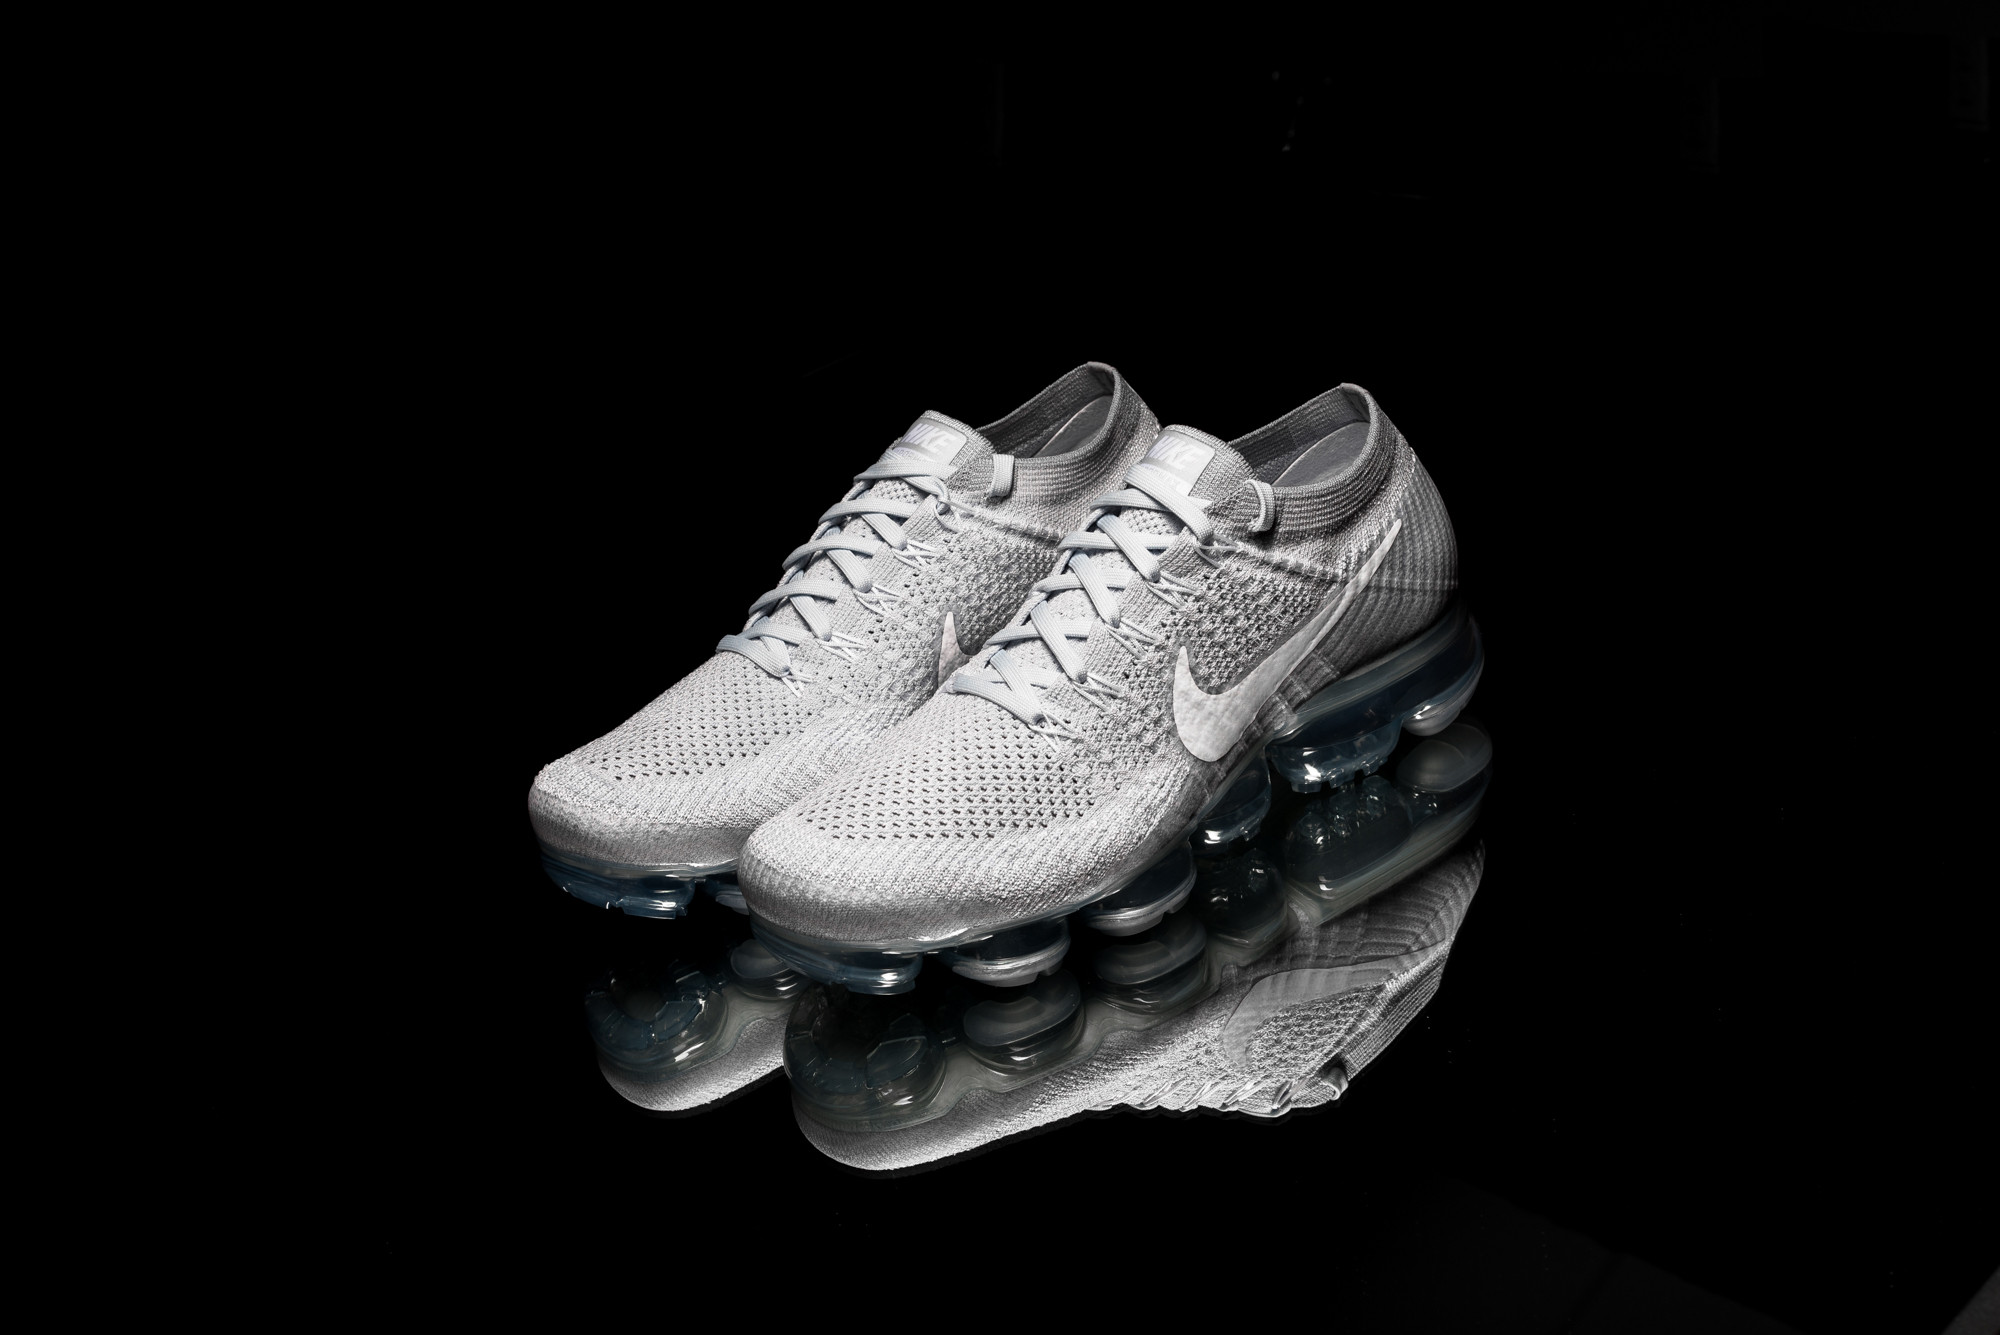 The Nike Air VaporMax is Now Available Air 23 Air Jordan Release